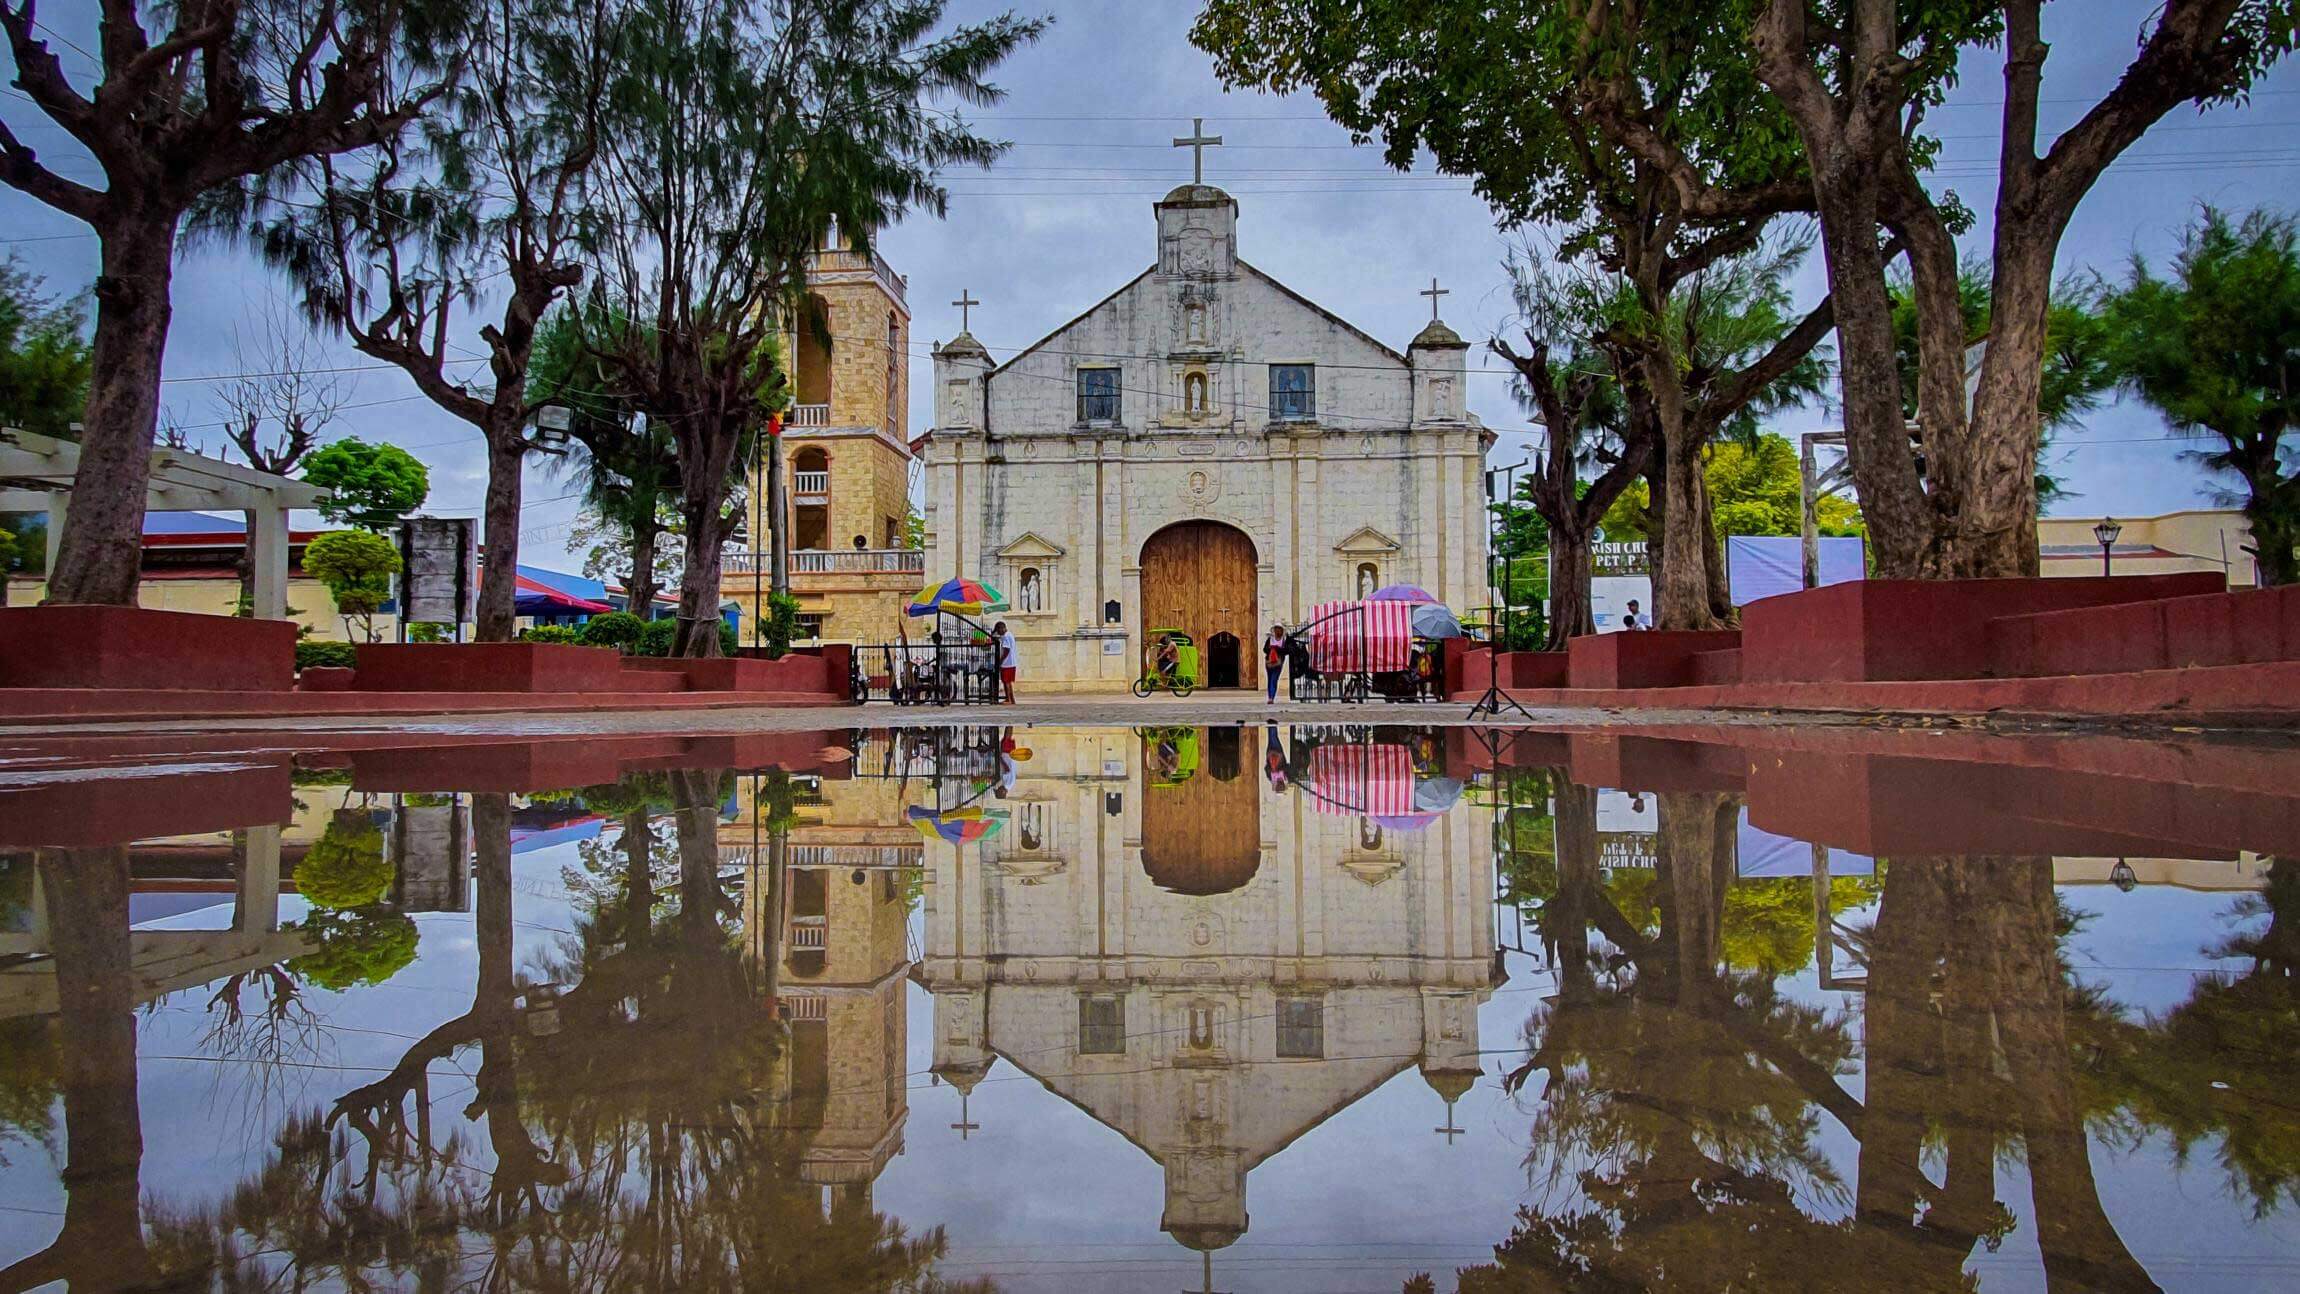 IN BANTAYAN. The Saints Peter and Paul Parish in Bantayan is among the heritage churches featured in the mobile exhibit.